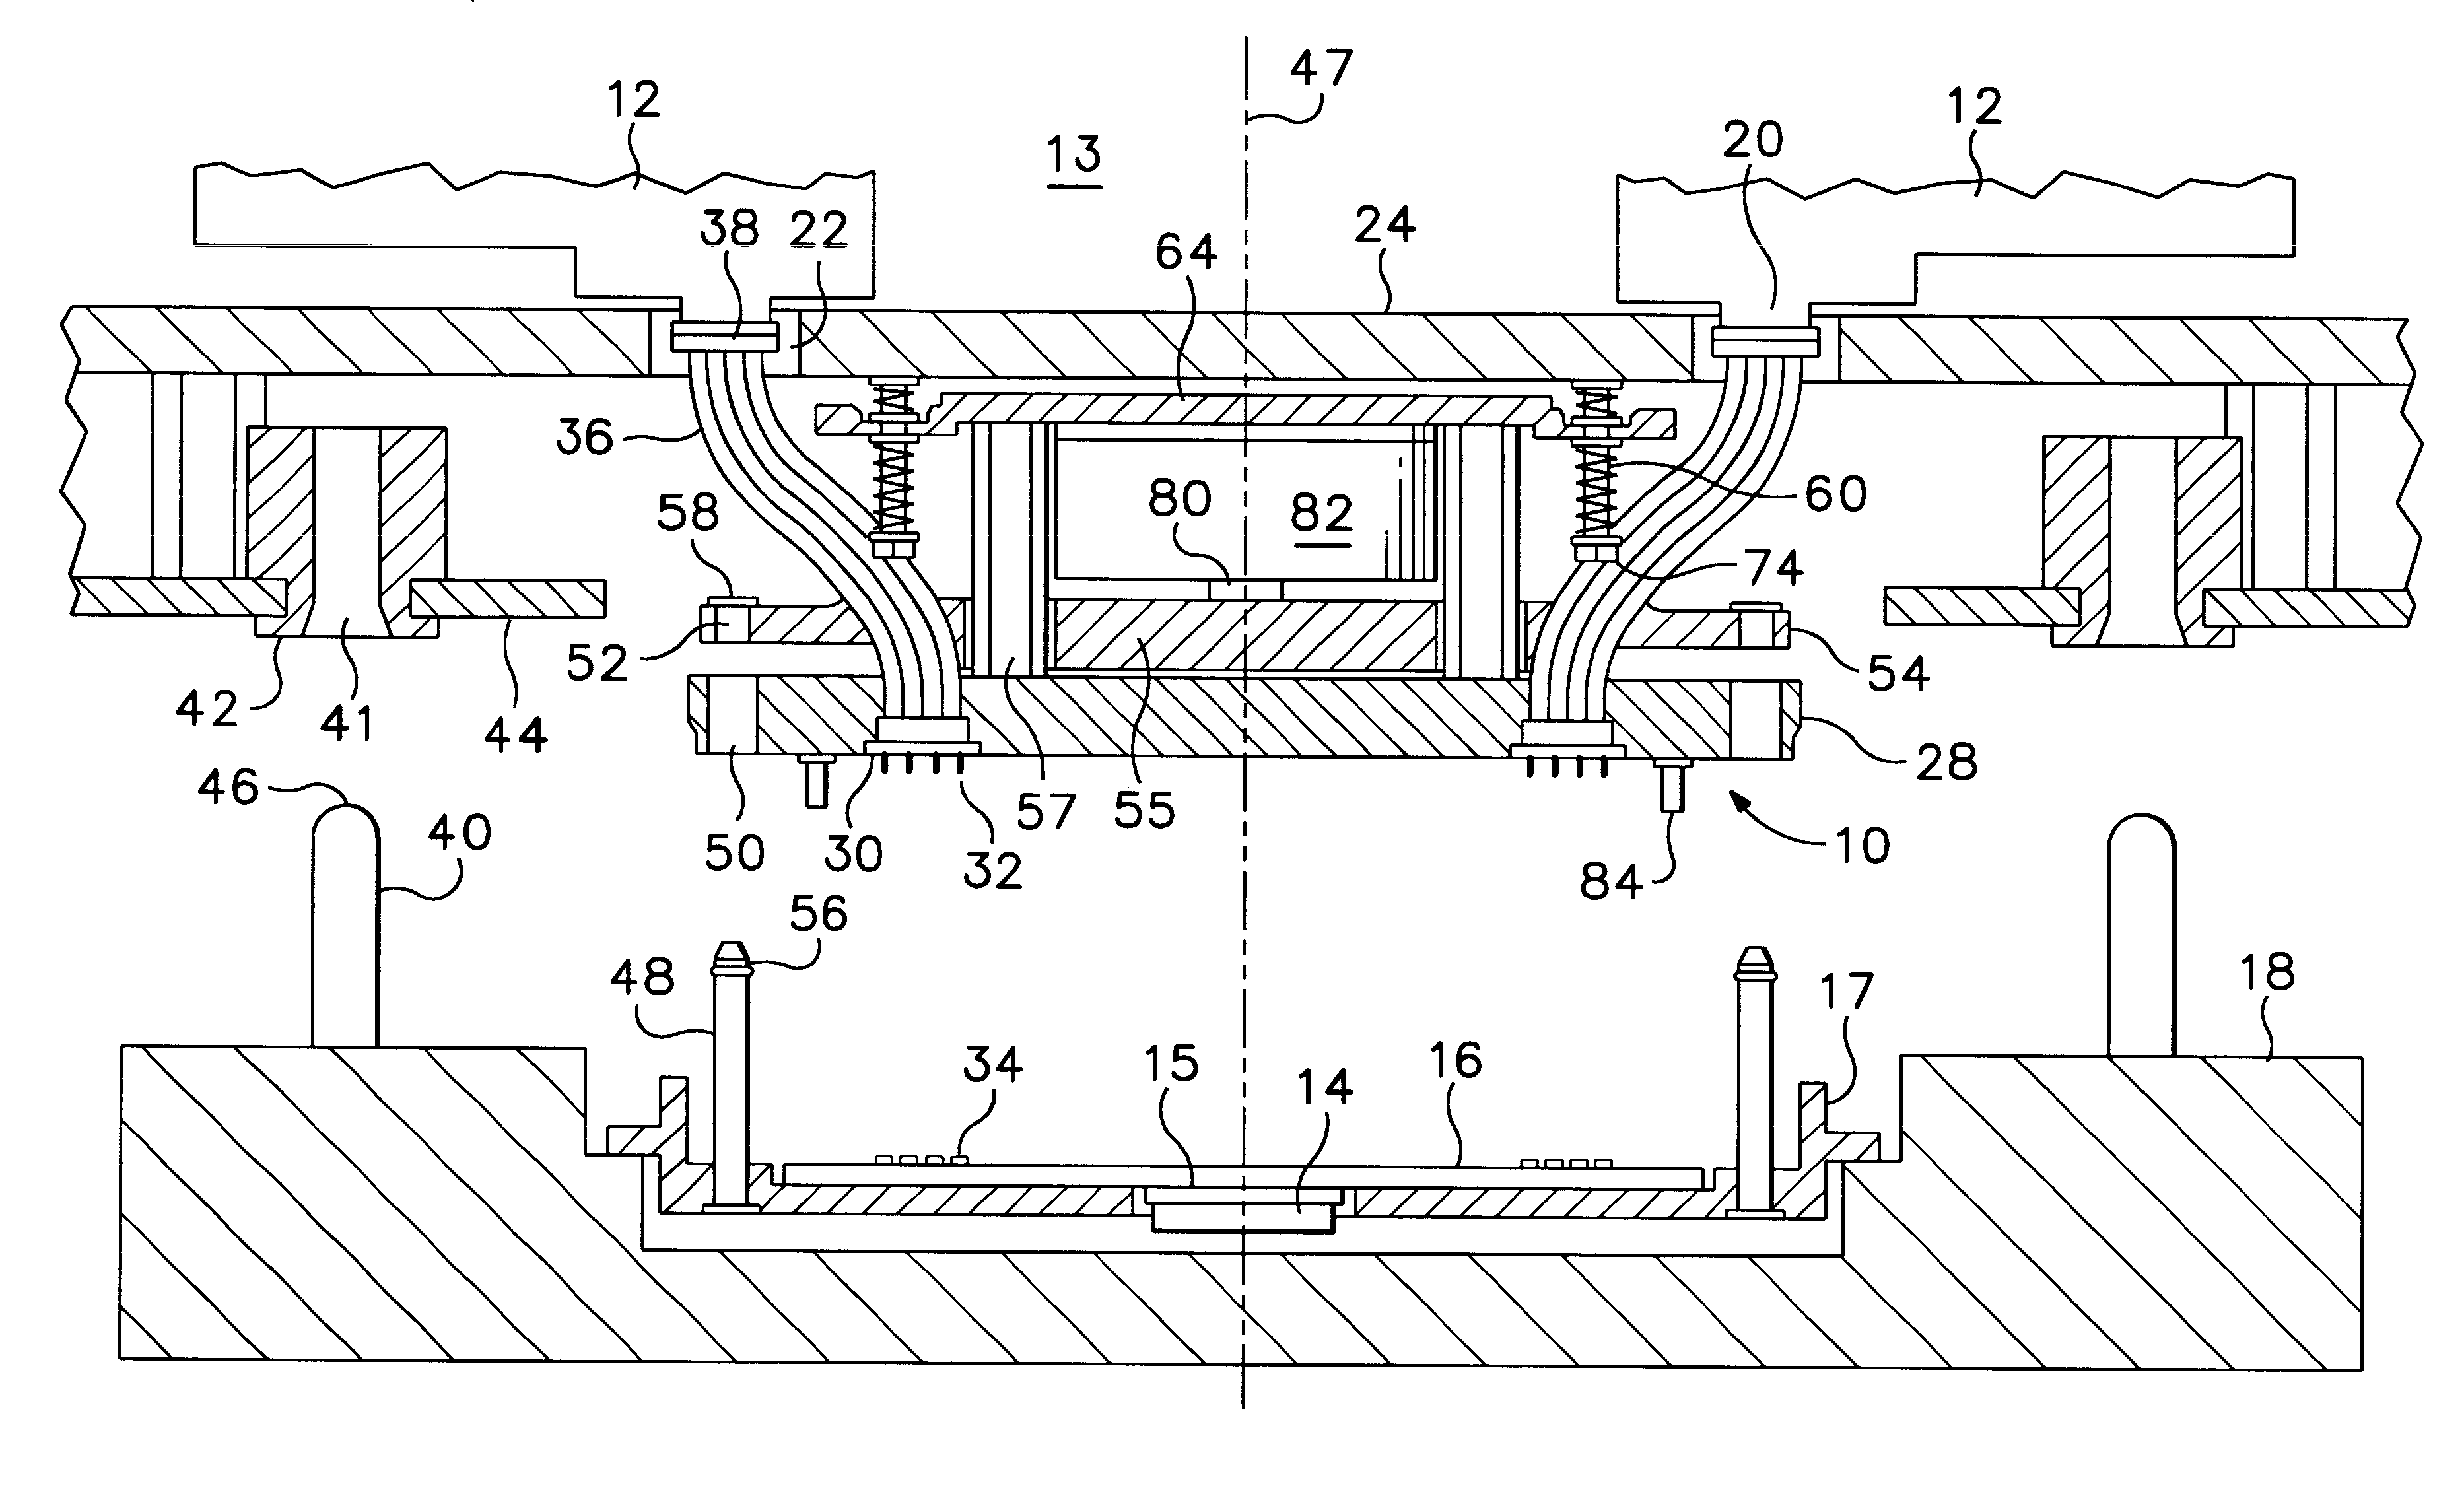 Floating interface for integrated circuit test head